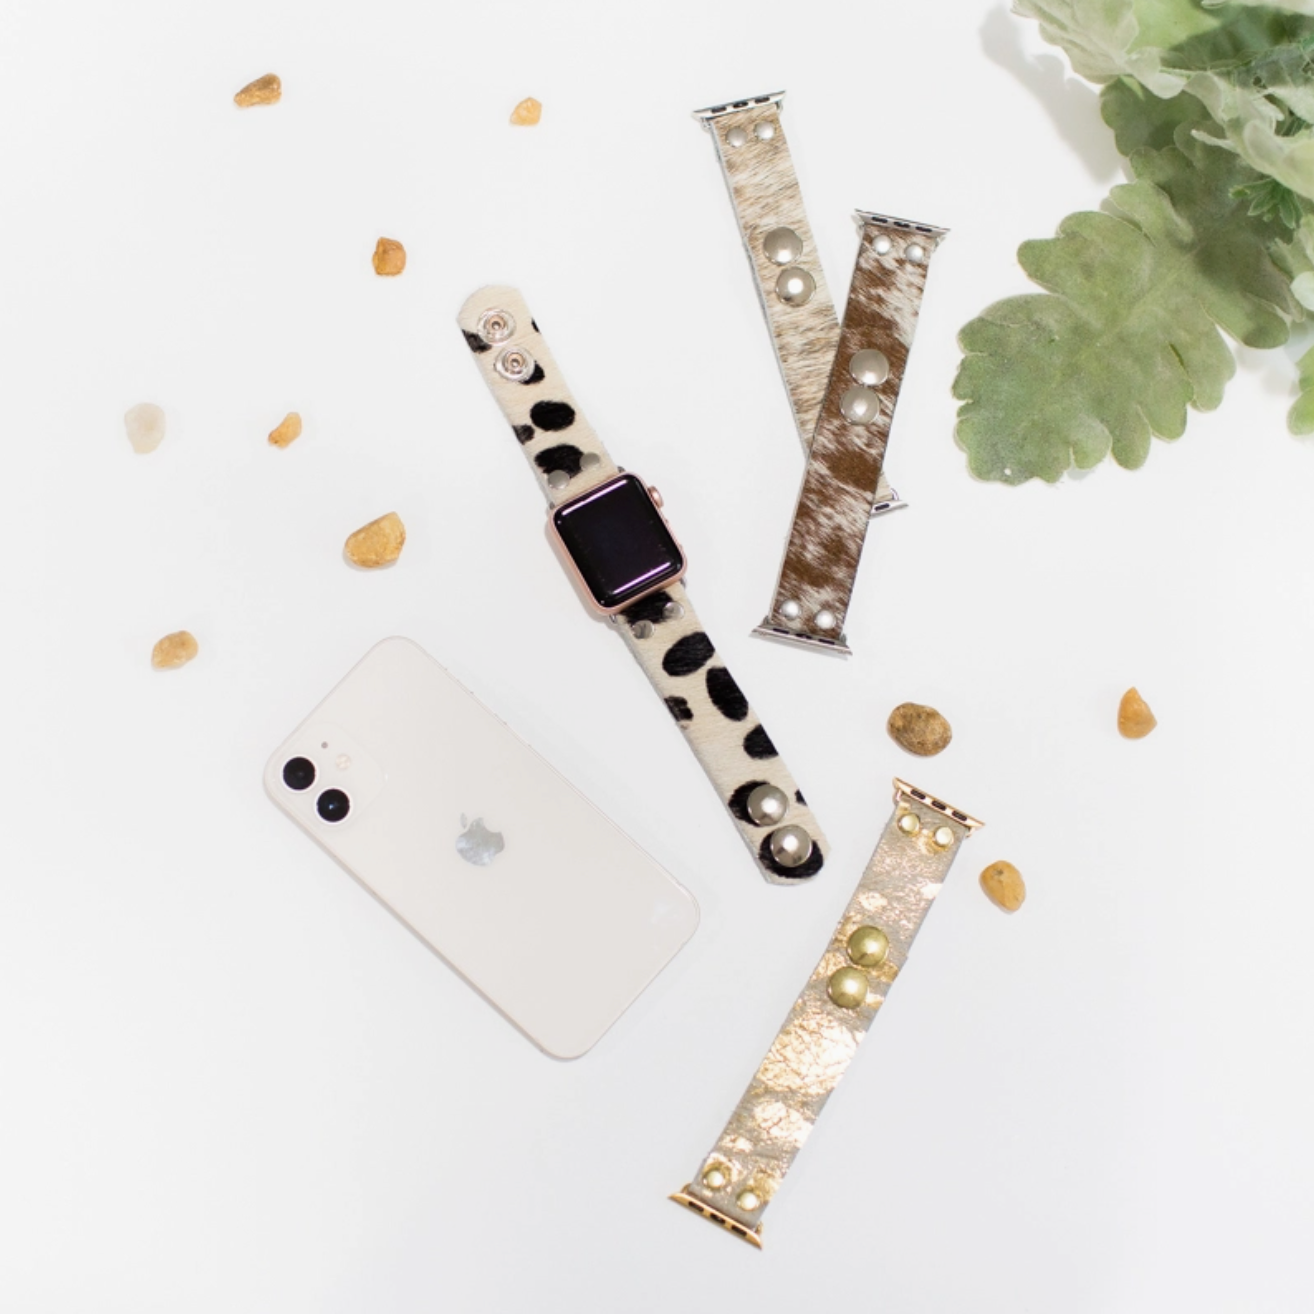 Cowhide Apple Watch Band